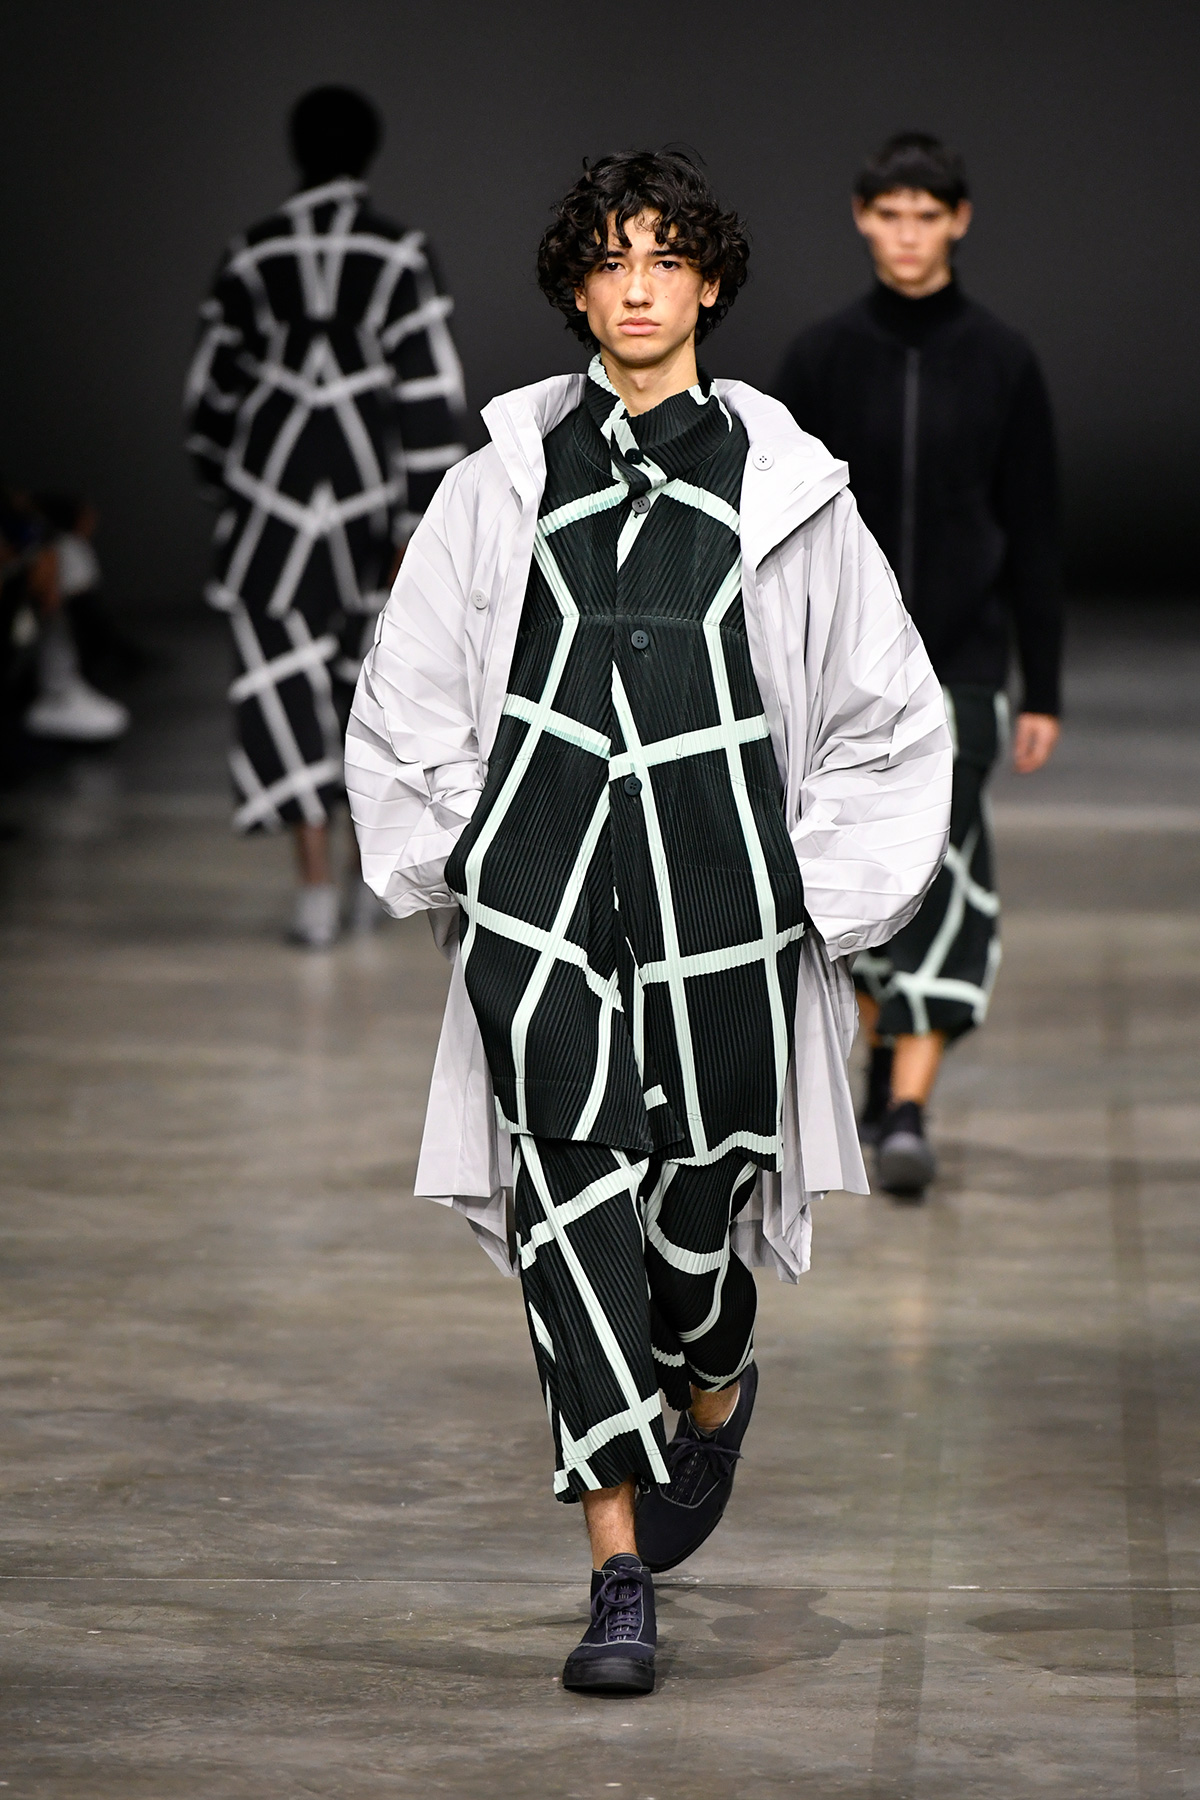 Runway at Homme Plissé Issey Miyake Mens Fall 2023 photographed on January 19, 2023 in Paris, France.